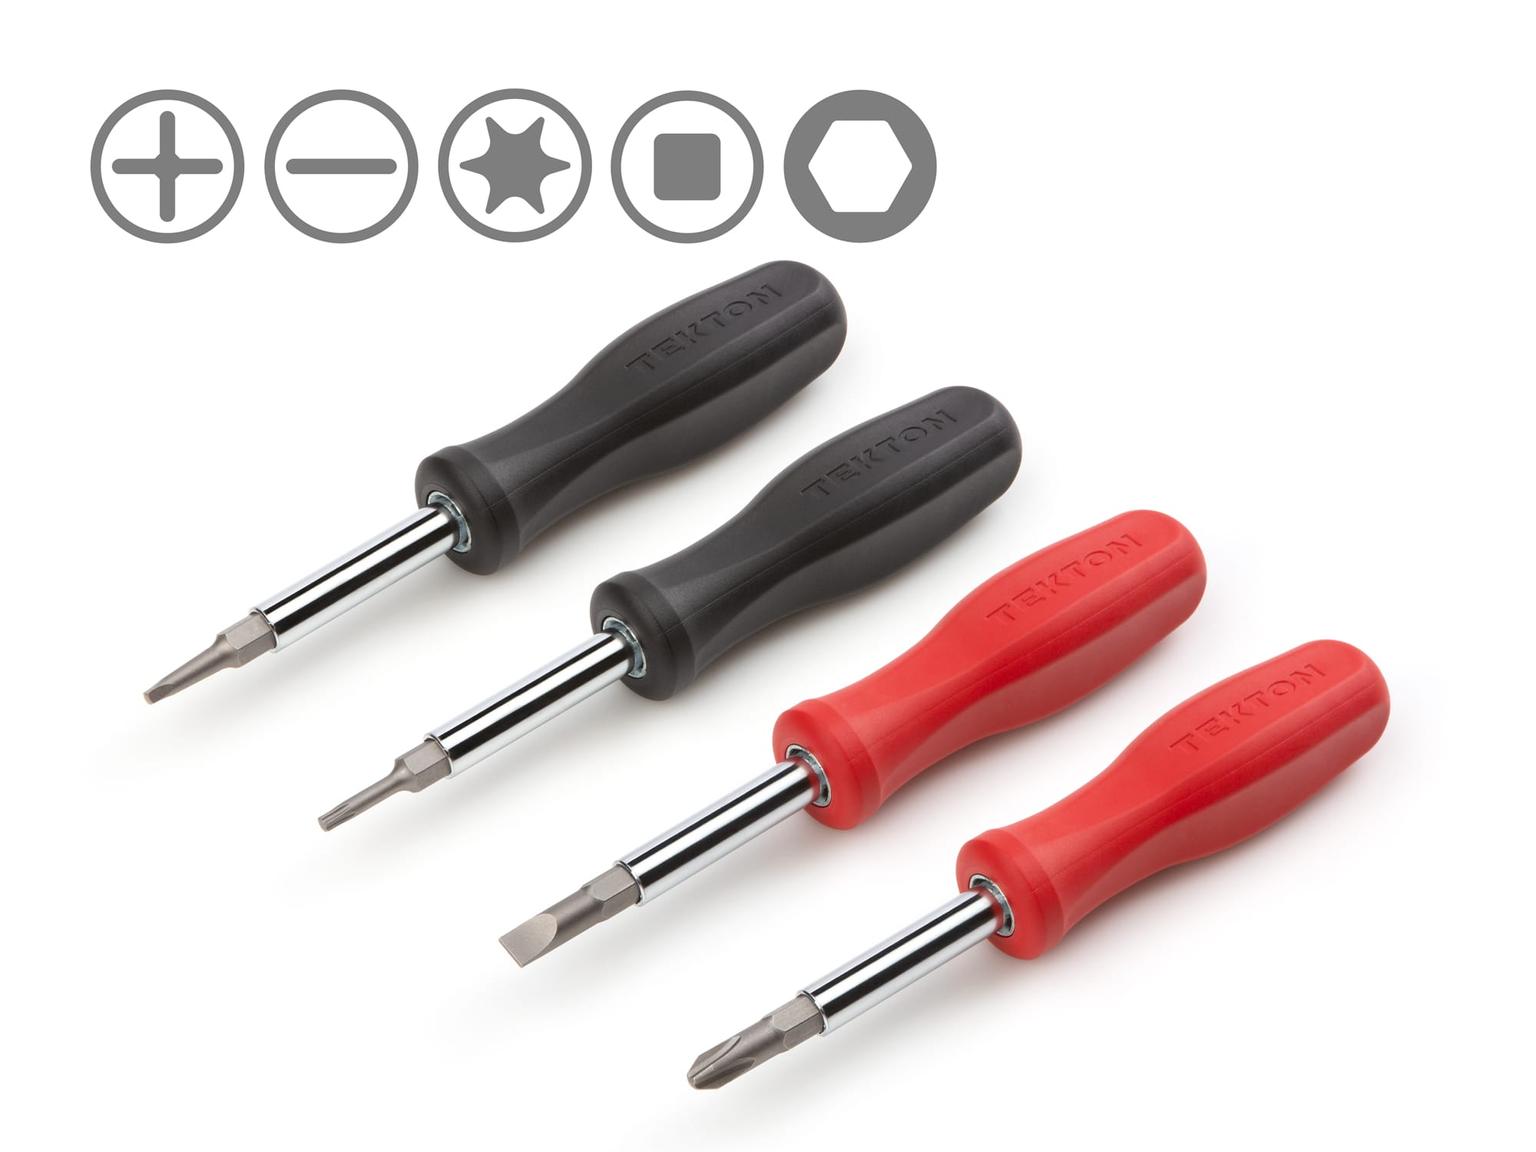 TEKTON DMS91002-T 6-in-1 Driver Set, 4-Piece (Phillips, Slotted, Torx, Square)